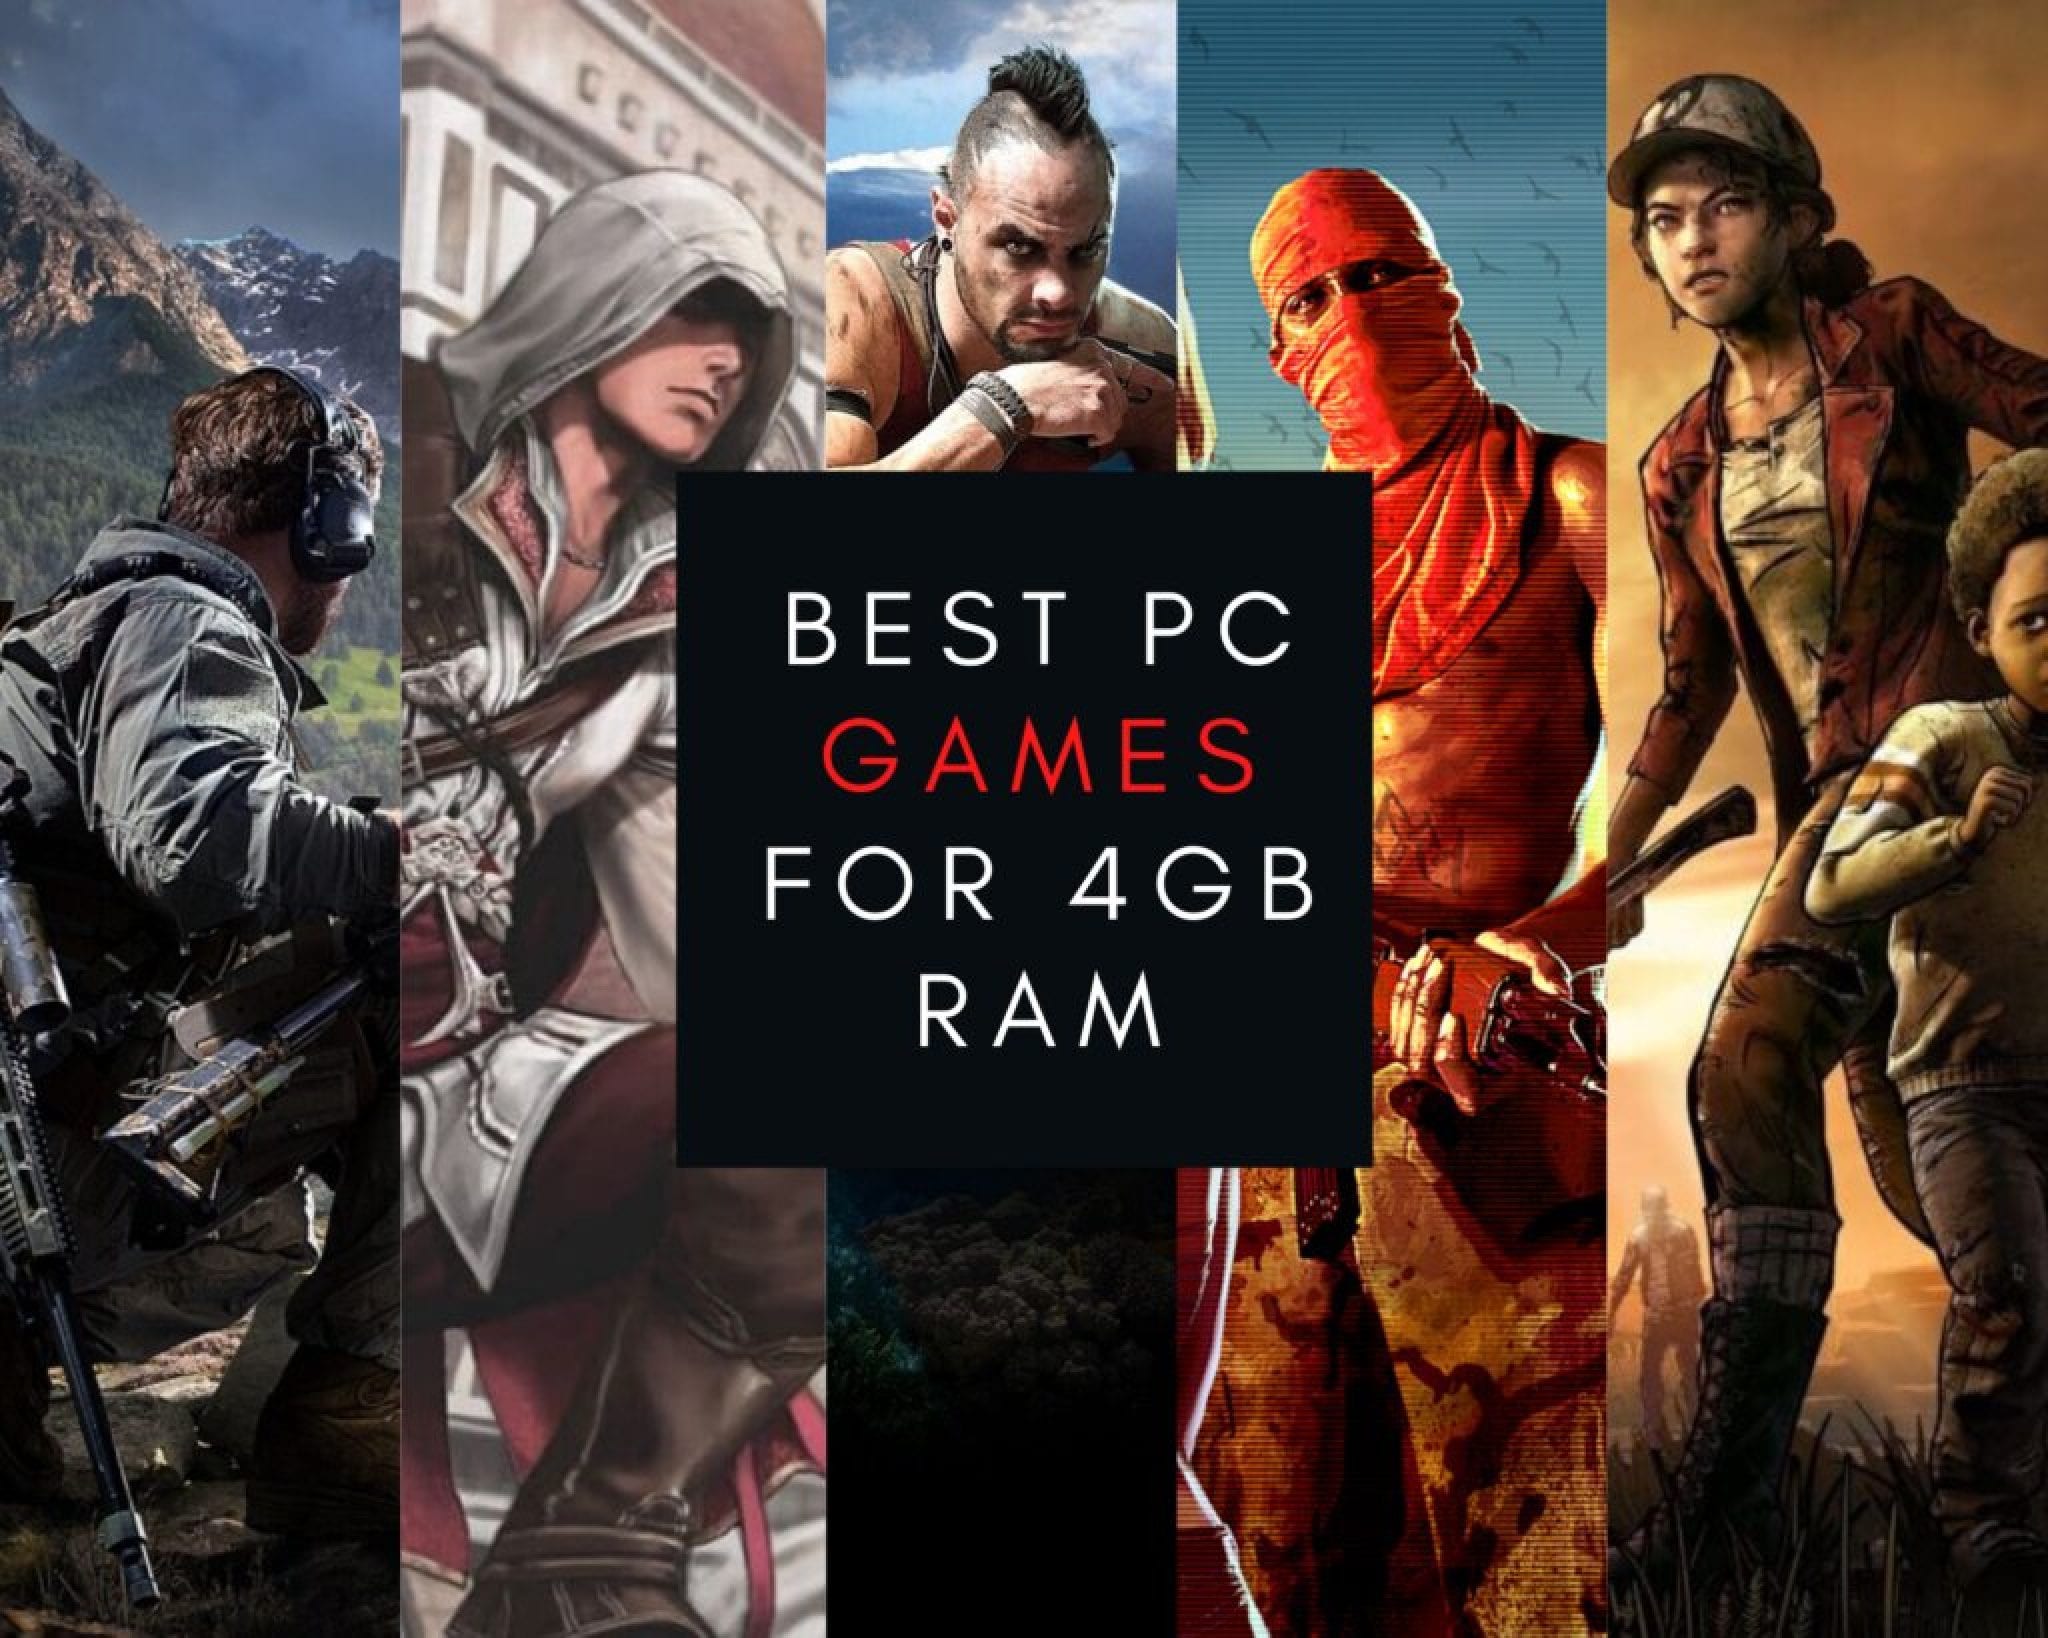 10 Pc Games For 4gb Ramlow End Pc Gaming Nation